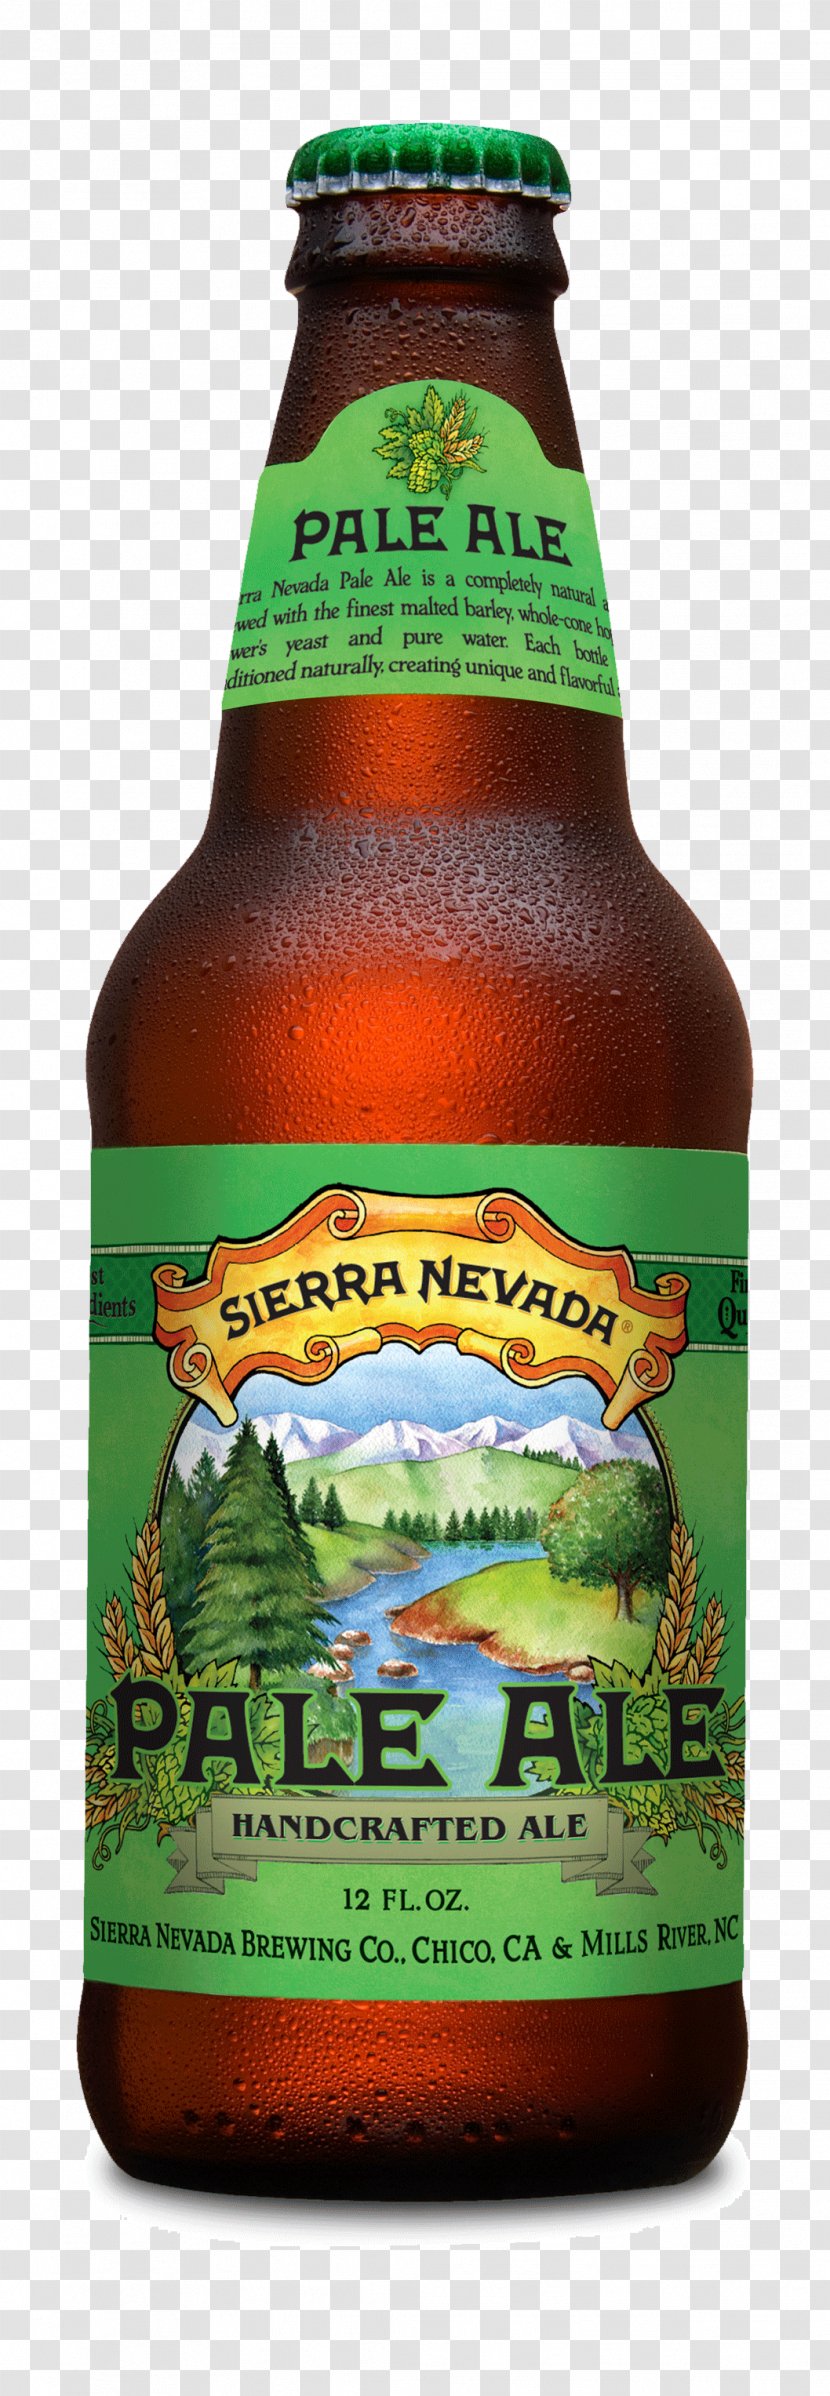 Sierra Nevada Brewing Company India Pale Ale Beer - Alcoholic Beverage Transparent PNG